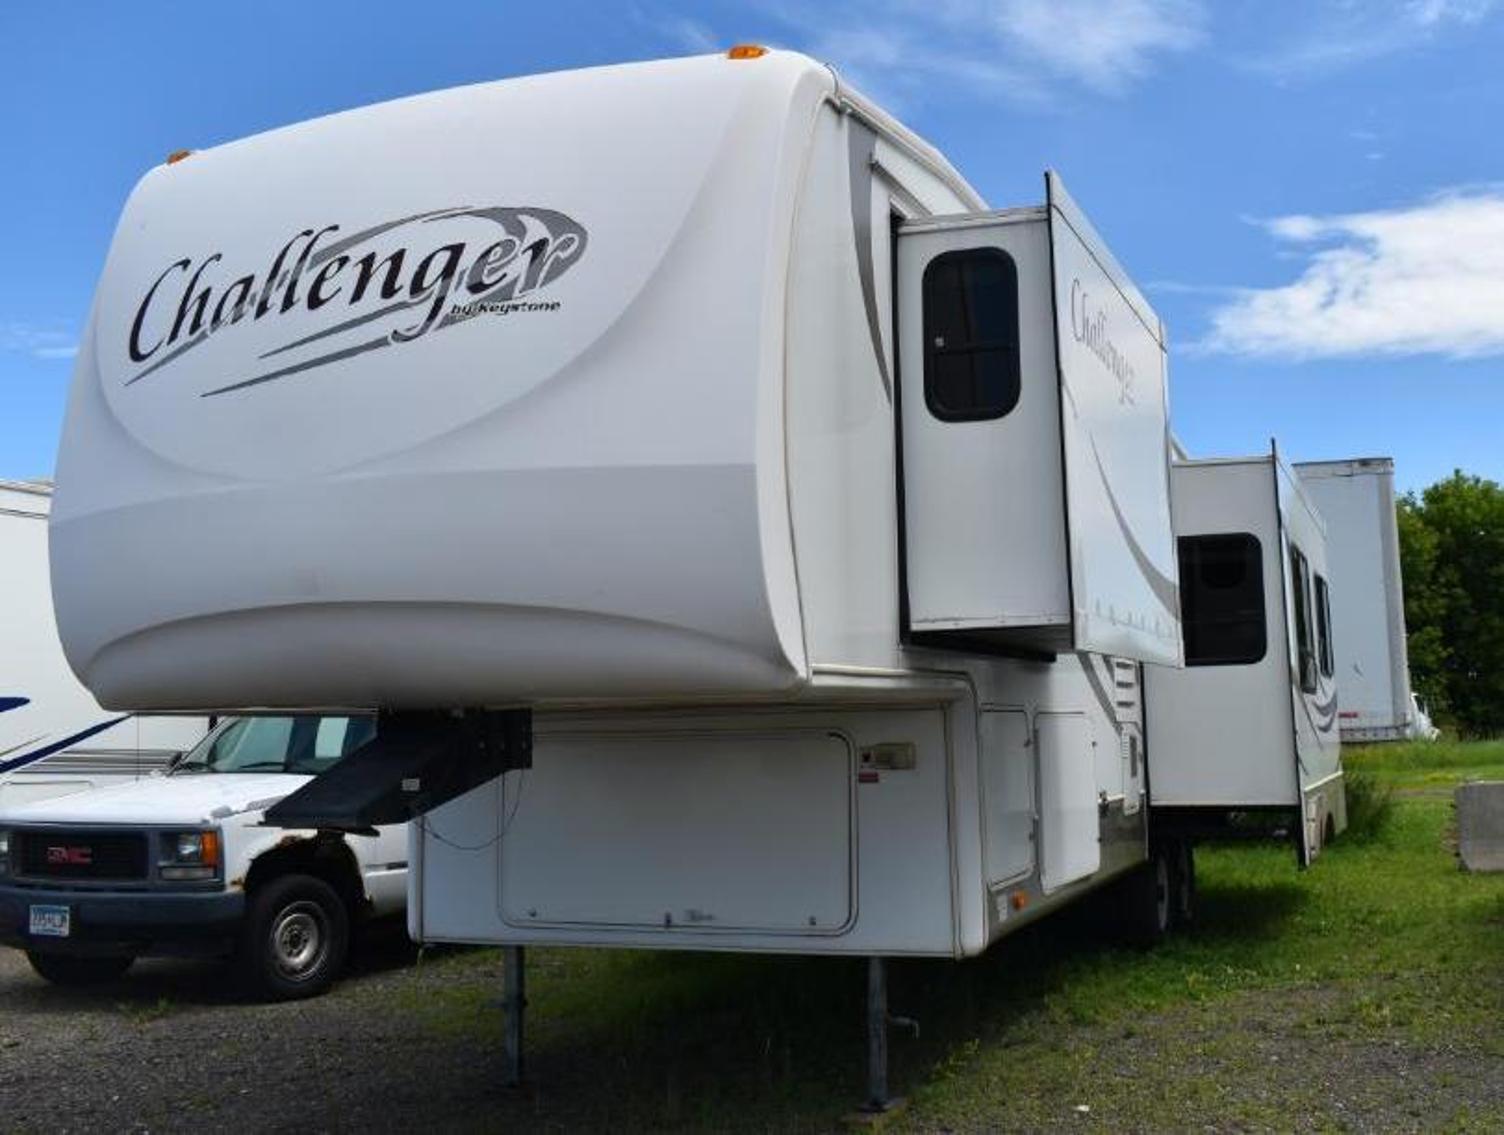 (14) Units: (6) 5th Wheels, (7) Travel Trailers and (1) Motorhome